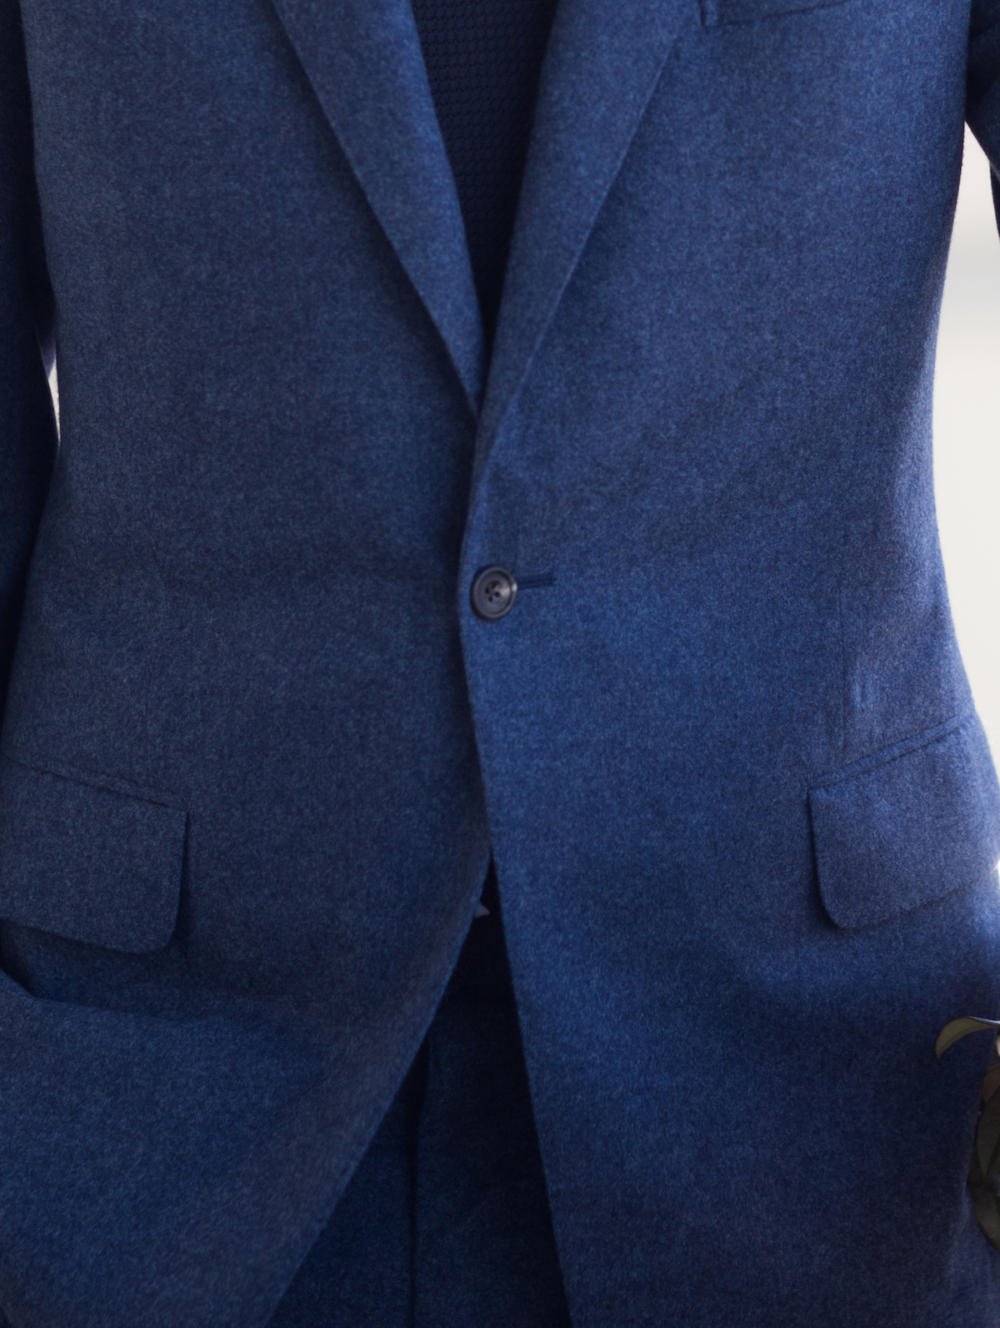 Air force (RAF) blue flannel suit: Whitcomb & Shaftesbury – Permanent Style